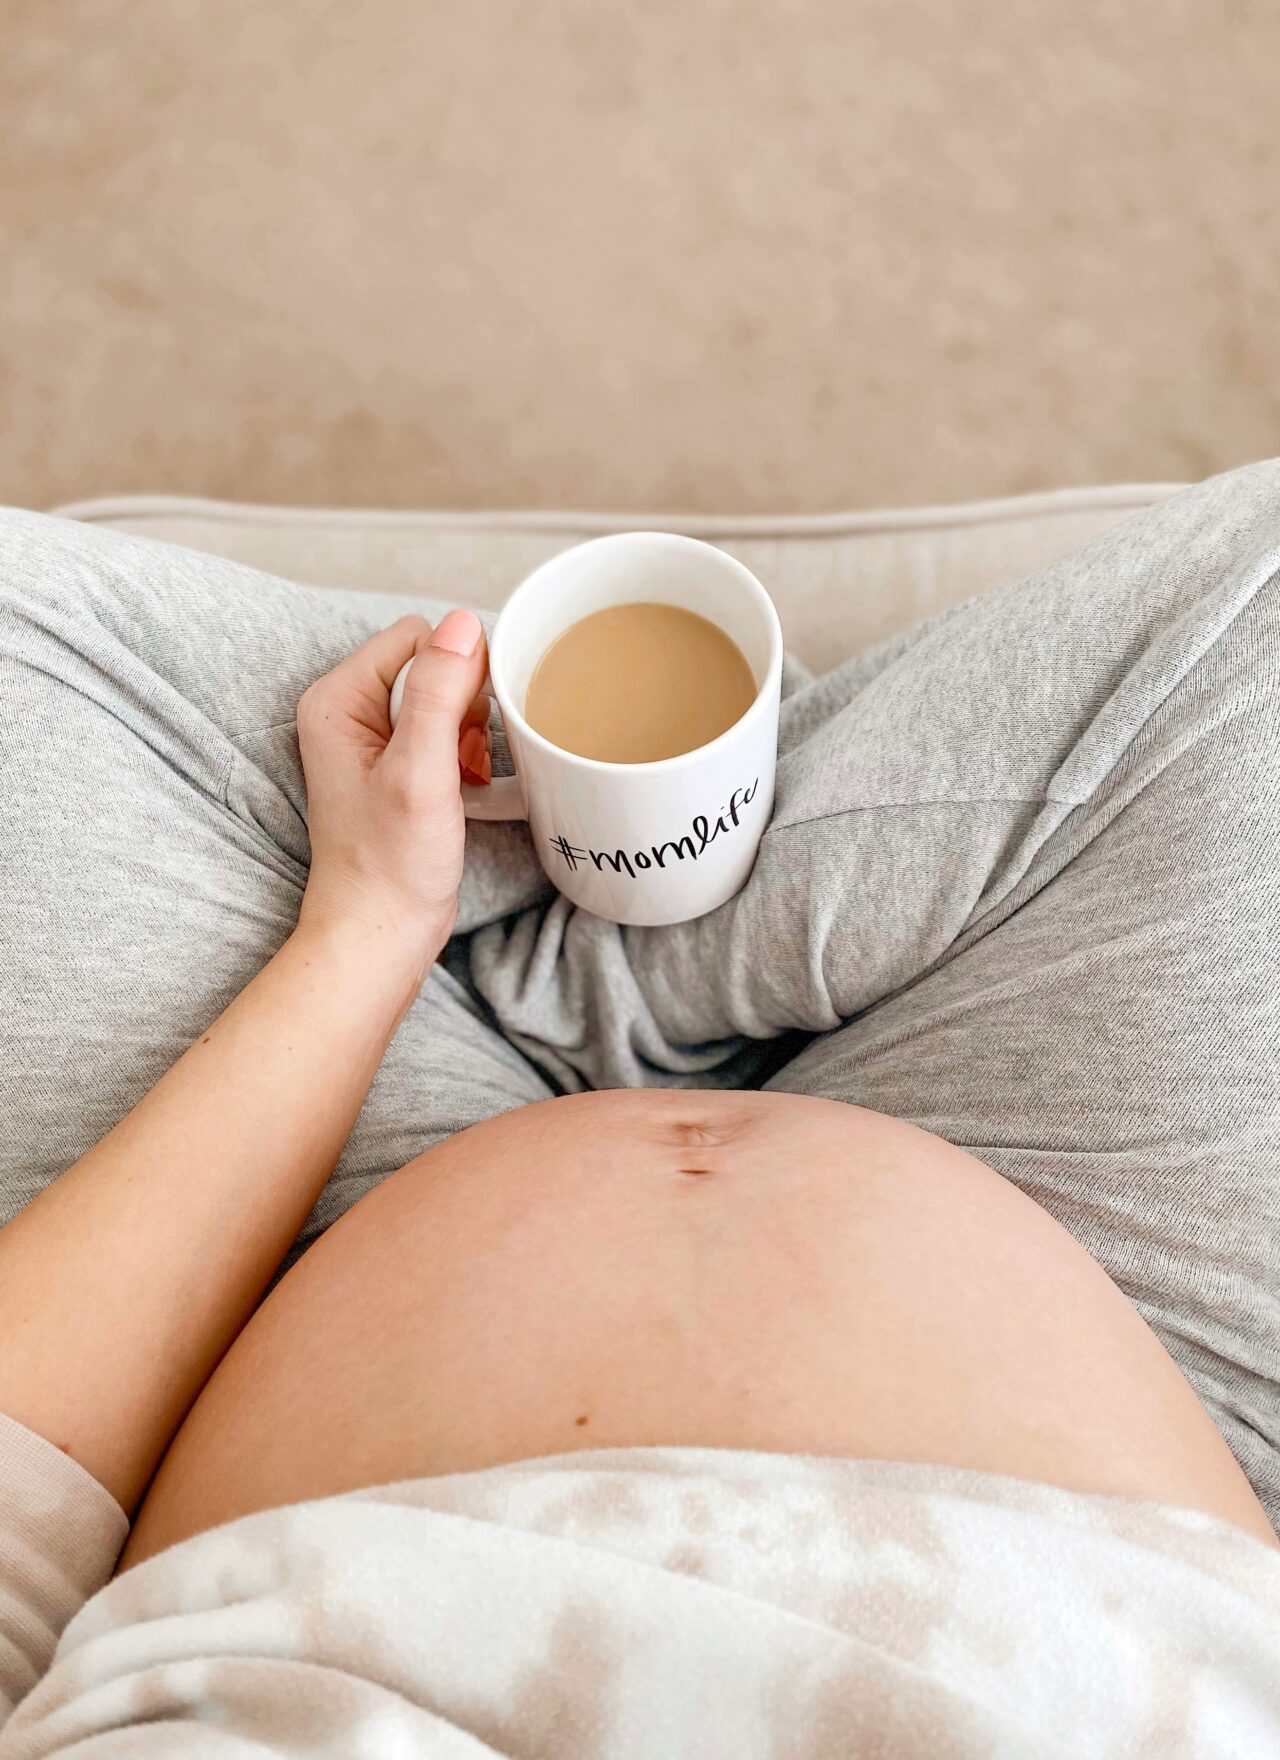 My Top Pregnancy Must-Haves By Trimester